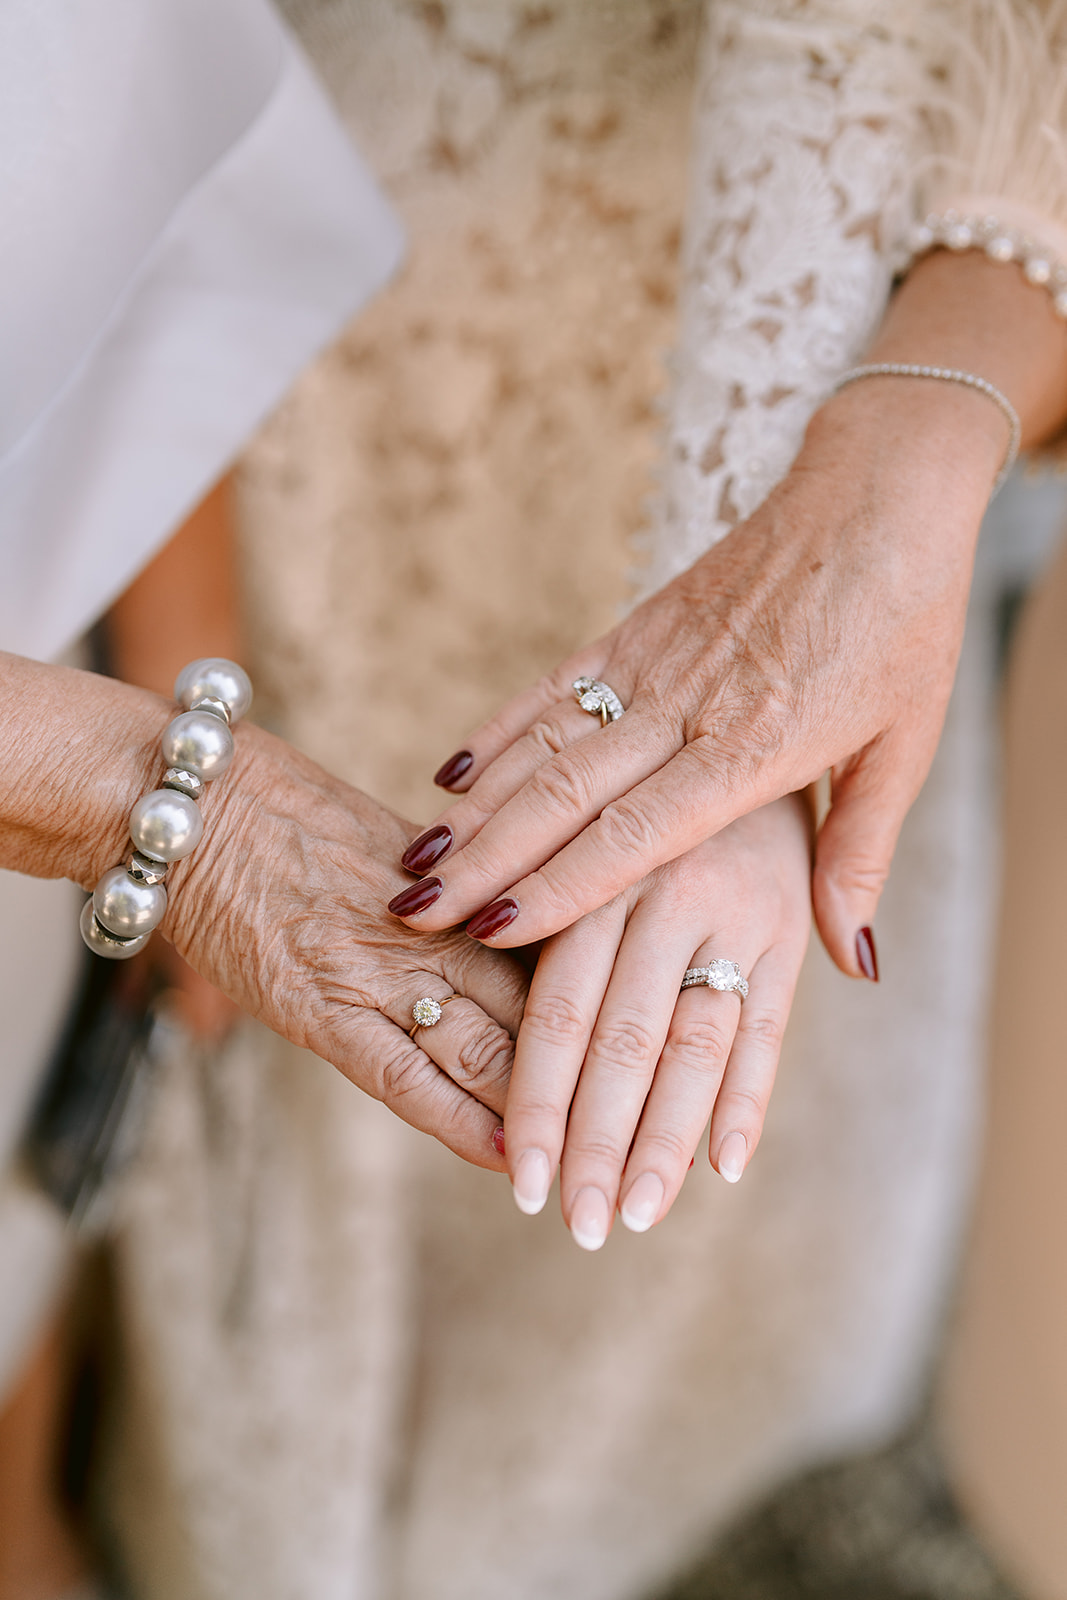 3 generations rings hands closeup bride mother and grandmother